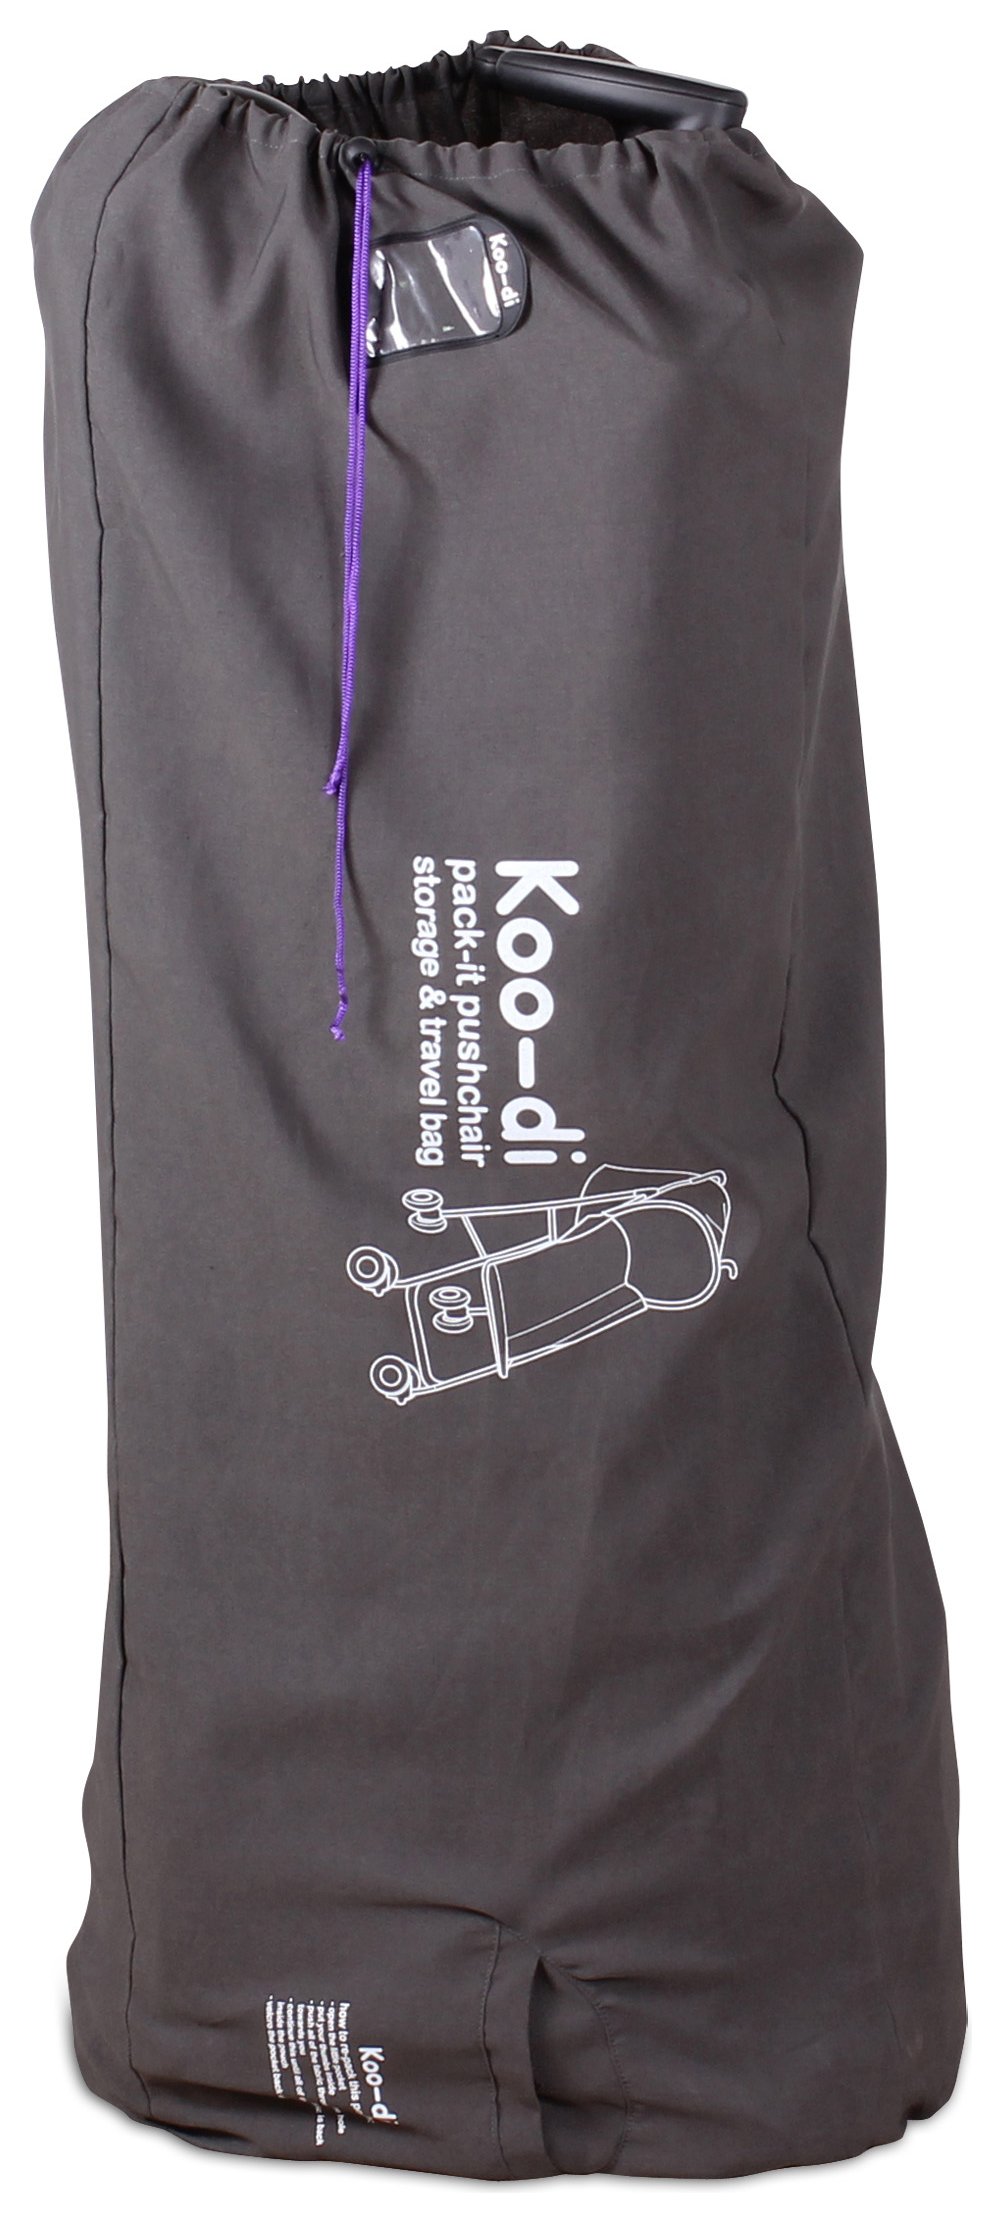 Koo-di Pack-It Pushchair Storage and Travel Bag - Charcoal